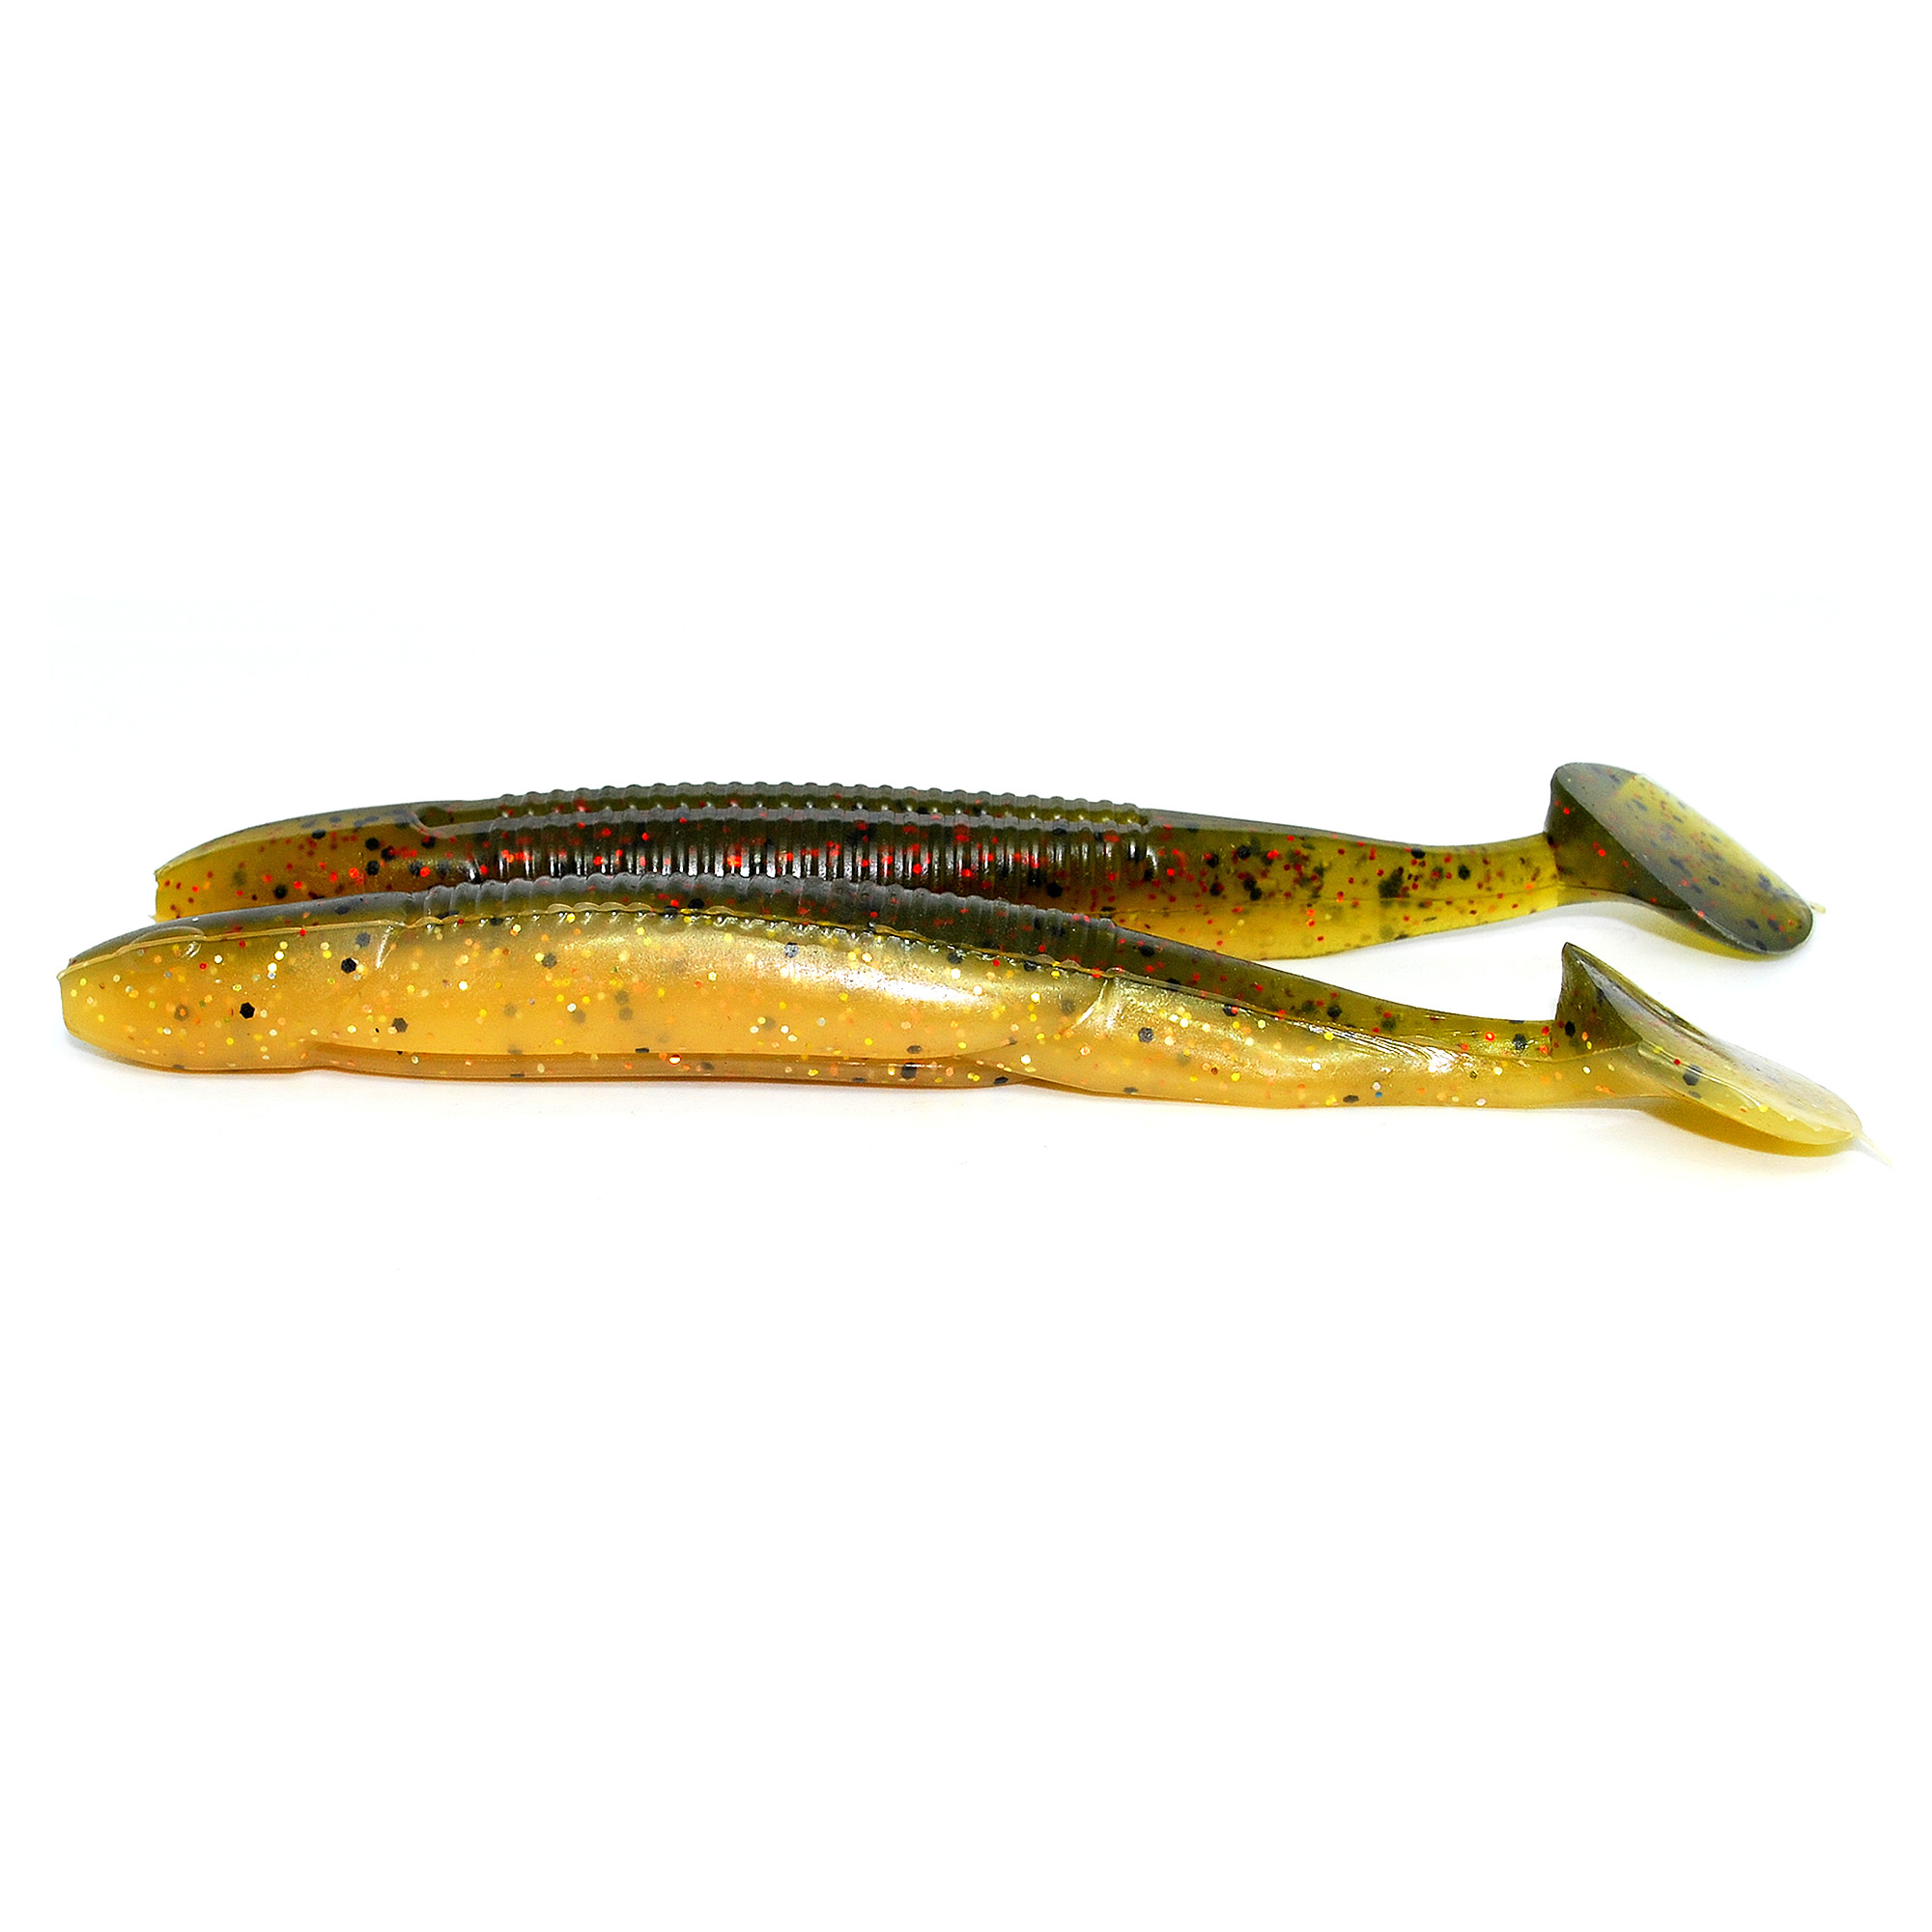 PRODUCTO LURES 6" BUZZ TAIL WORM WORMS/JERK / SWIM BAITS 20 CT SCENTED 